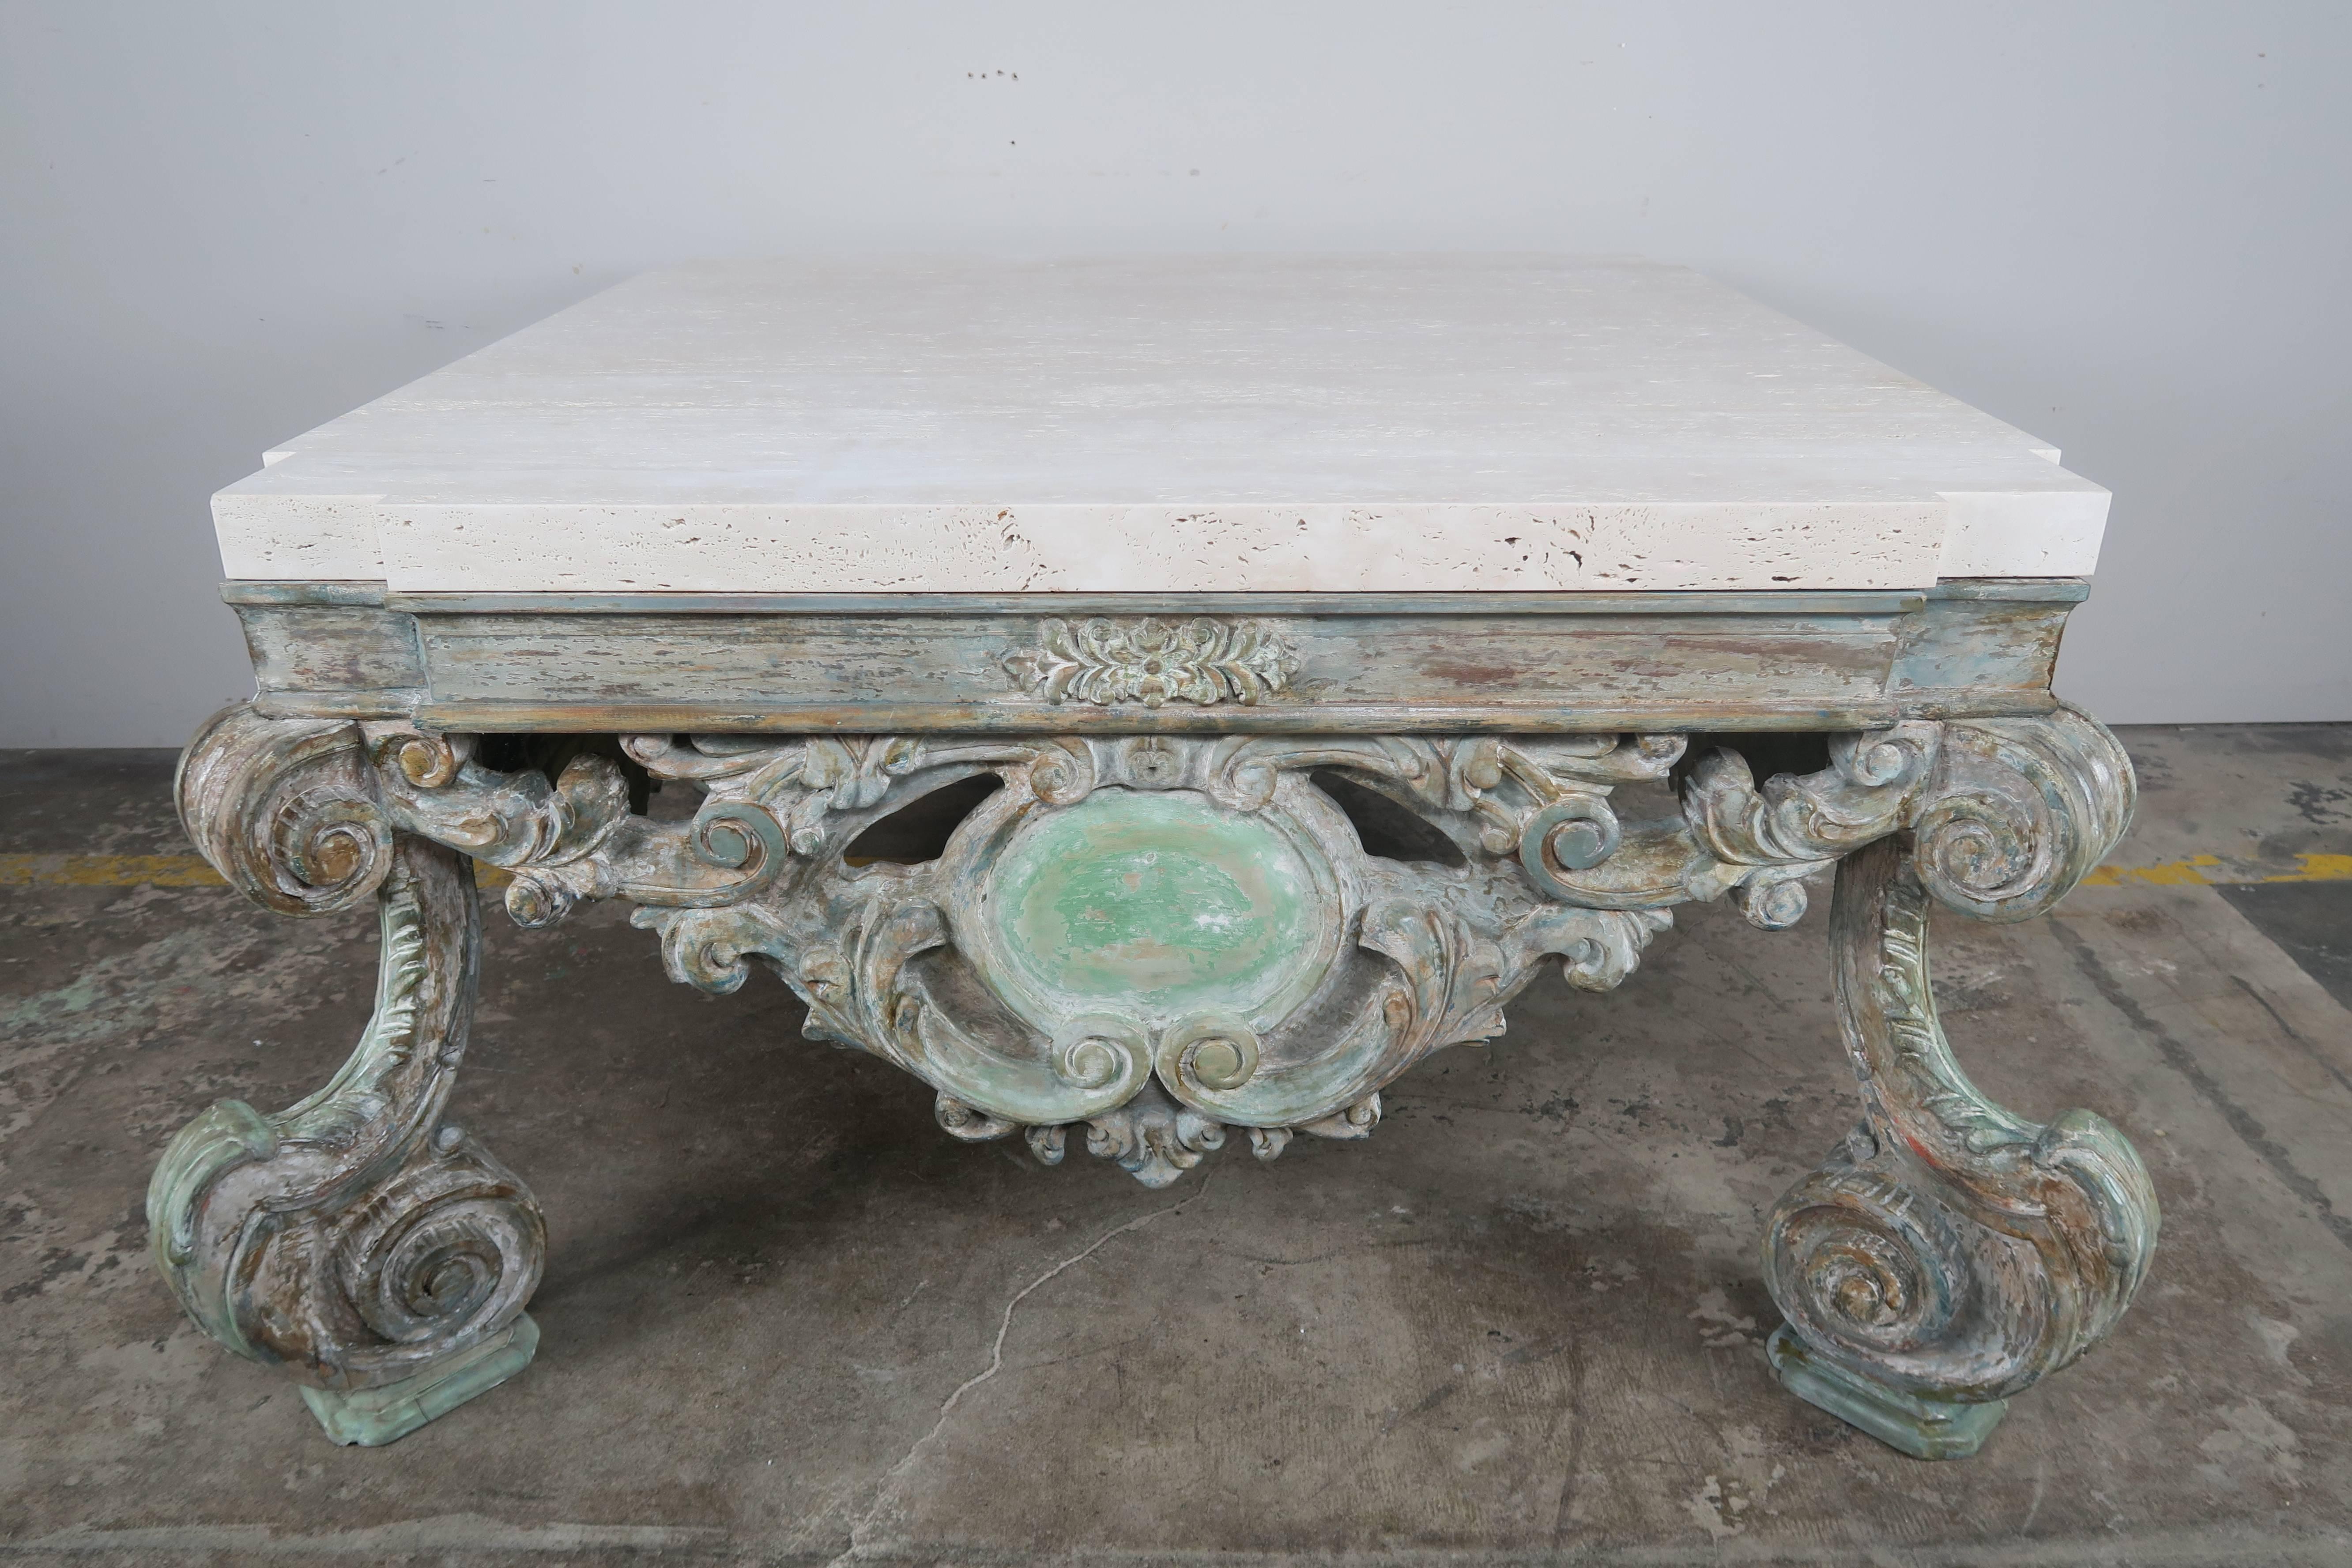 French Louis XV style hand-carved wood coffee table standing on four scrolled legs. All four sides have beautiful intricate carvings depicting swirling acanthus leaves around a center cartouche. Worn paint remains throughout. Measures: 2